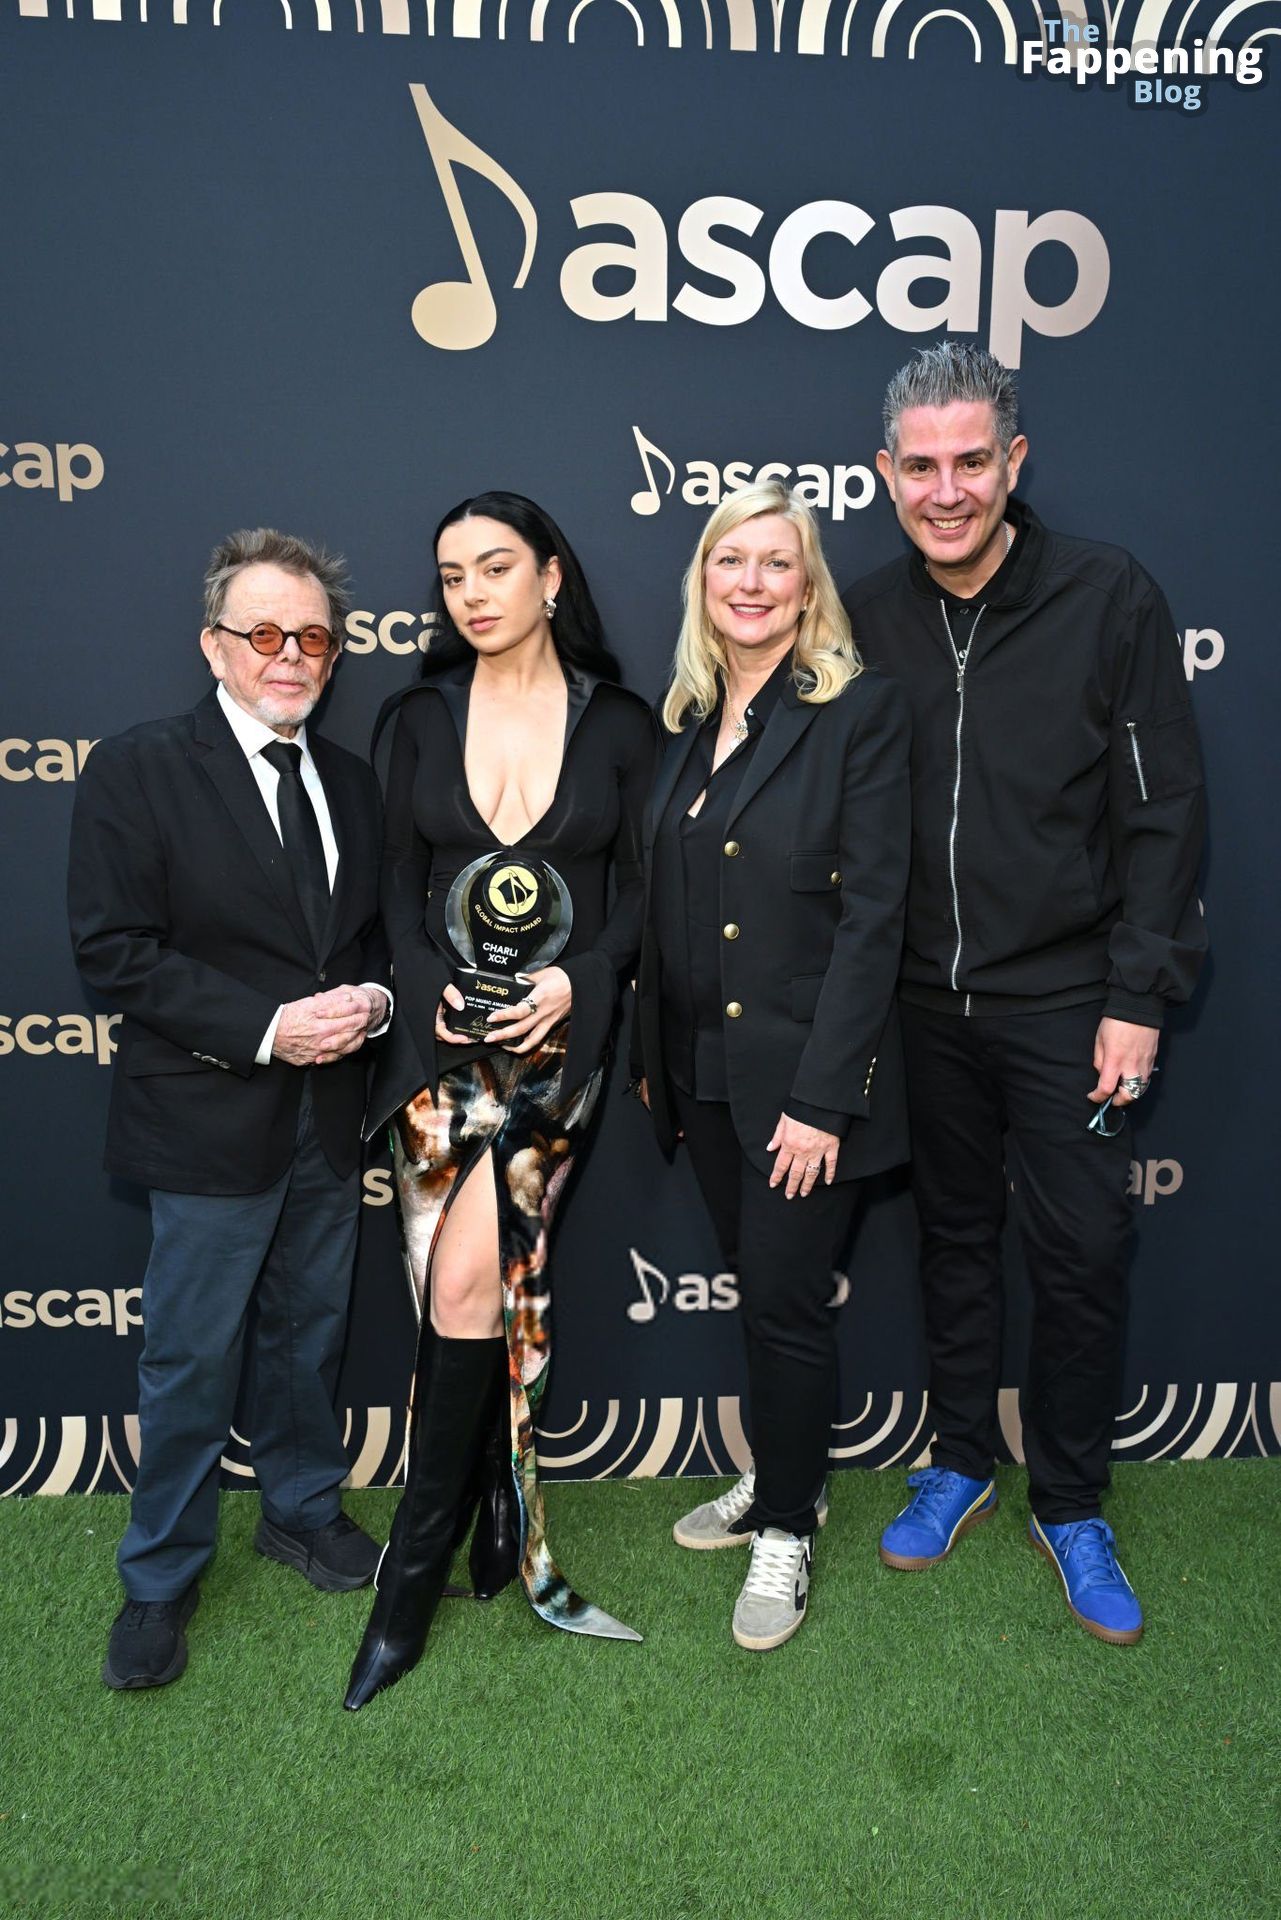 charli-xcx-braless-cleavage-ascap-pop-music-awards-11-thefappeningblog.com_.jpg